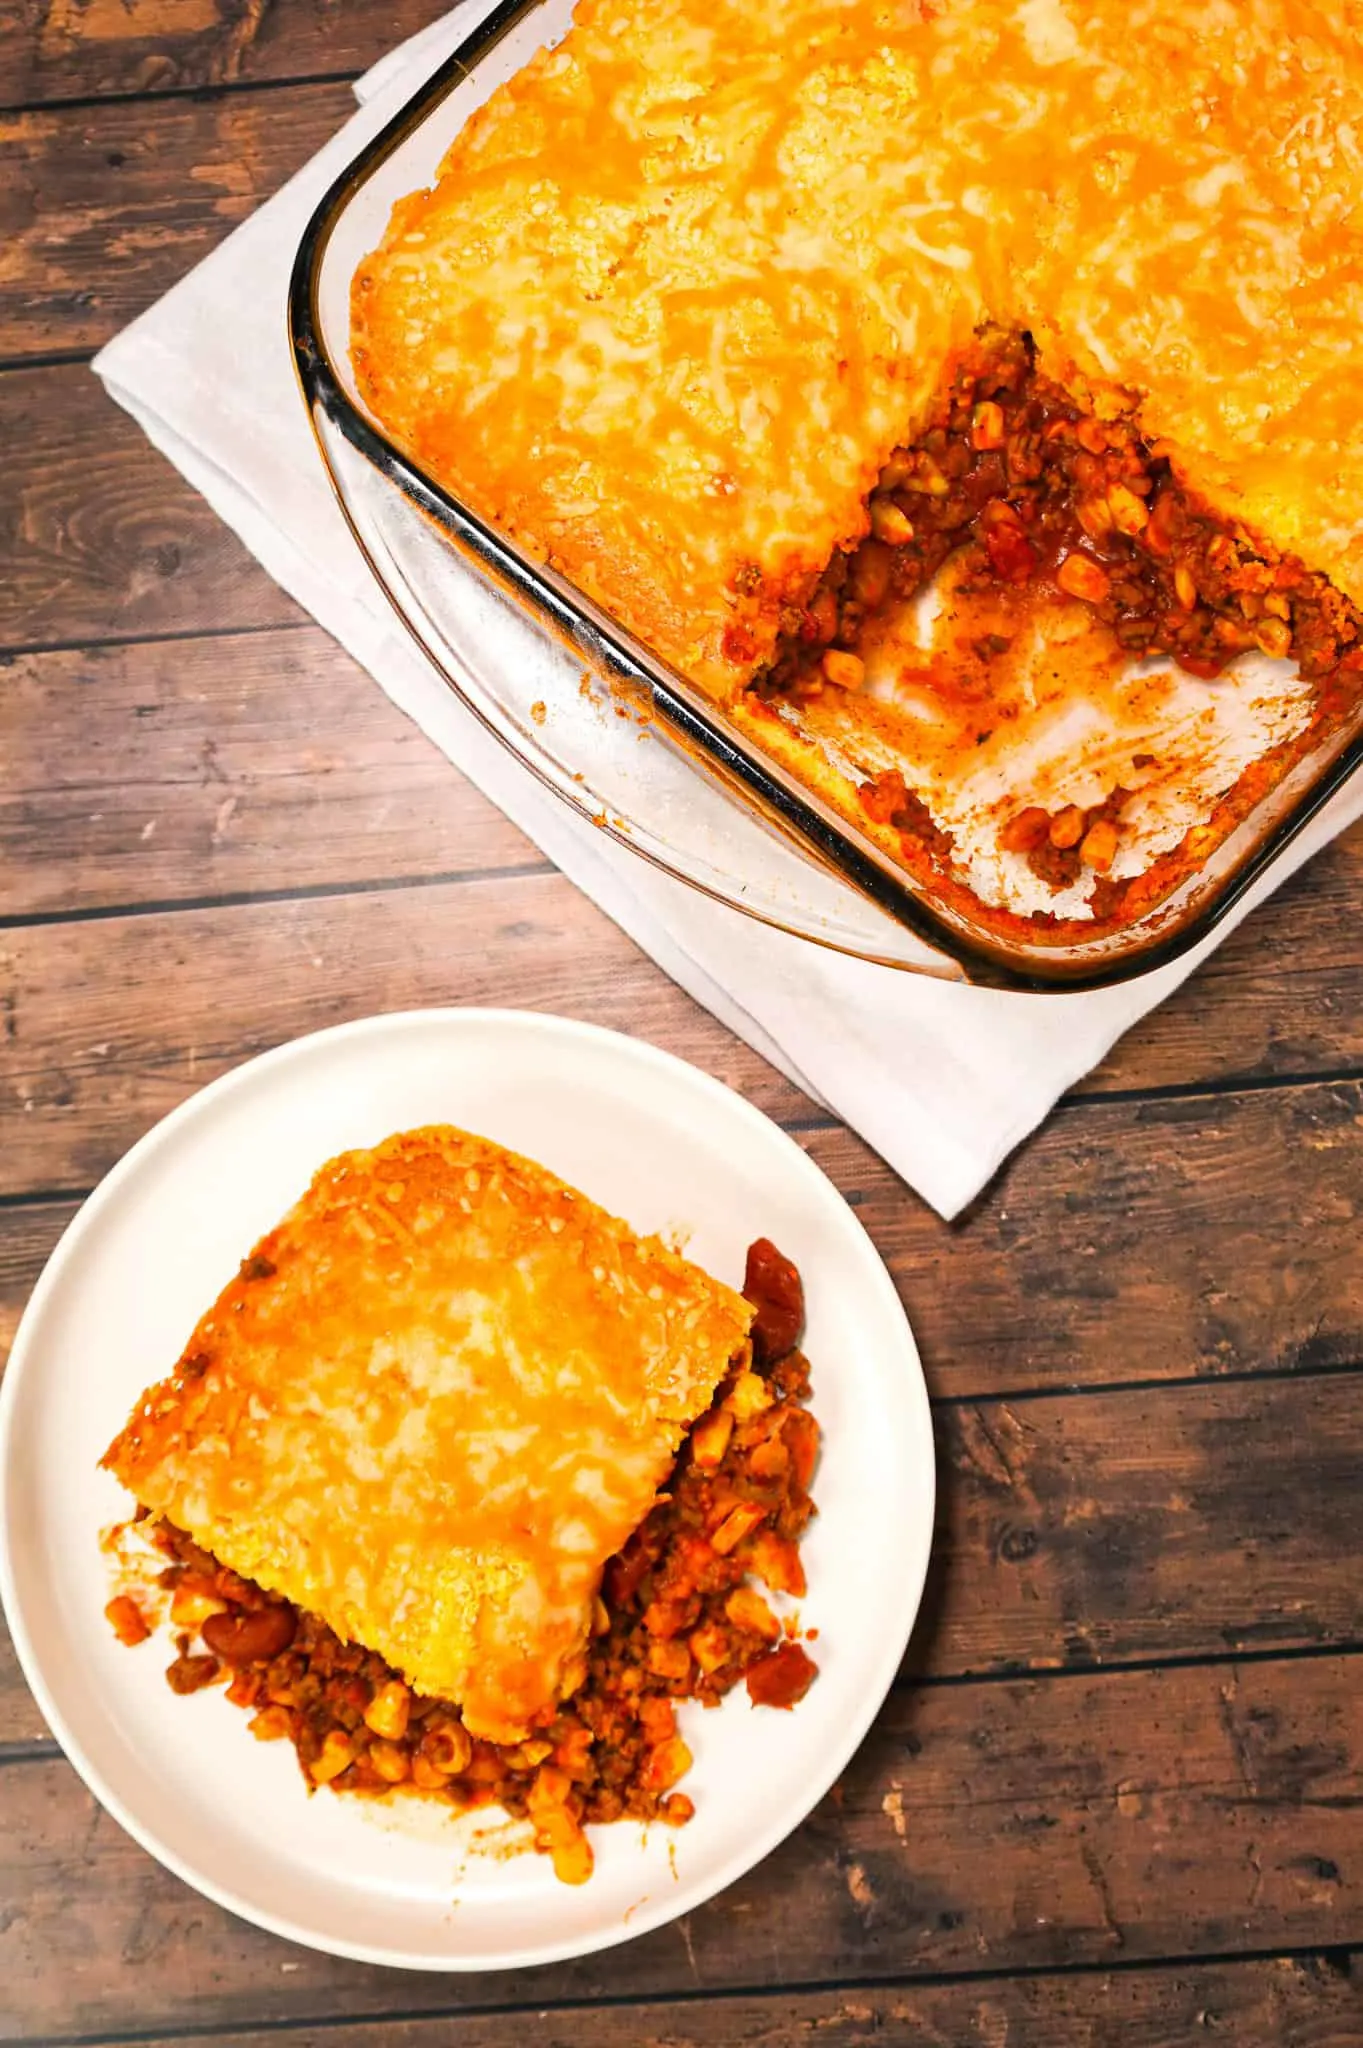 Chili Cornbread Casserole is an easy ground beef dinner recipe loaded with salsa, mixed beans, corn, chili seasoning and topped with cornbread and shredded cheese.